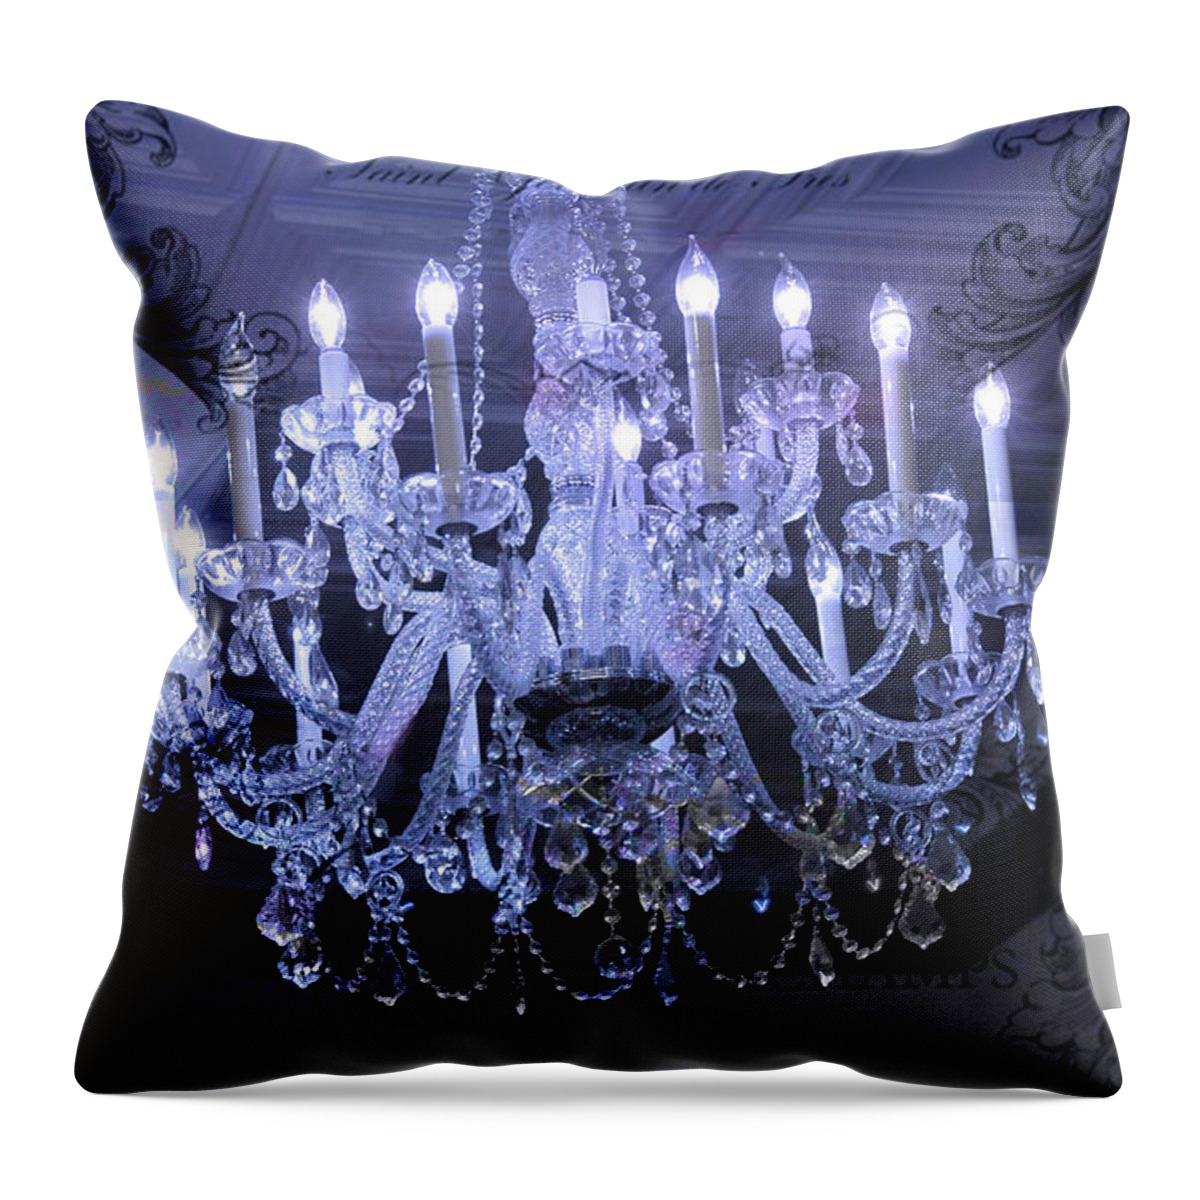 Paris Throw Pillow featuring the photograph Paris Blue Crystal Chandelier Sparkling Chandelier Art - Paris Blue Shimmering Chandelier Art Deco by Kathy Fornal